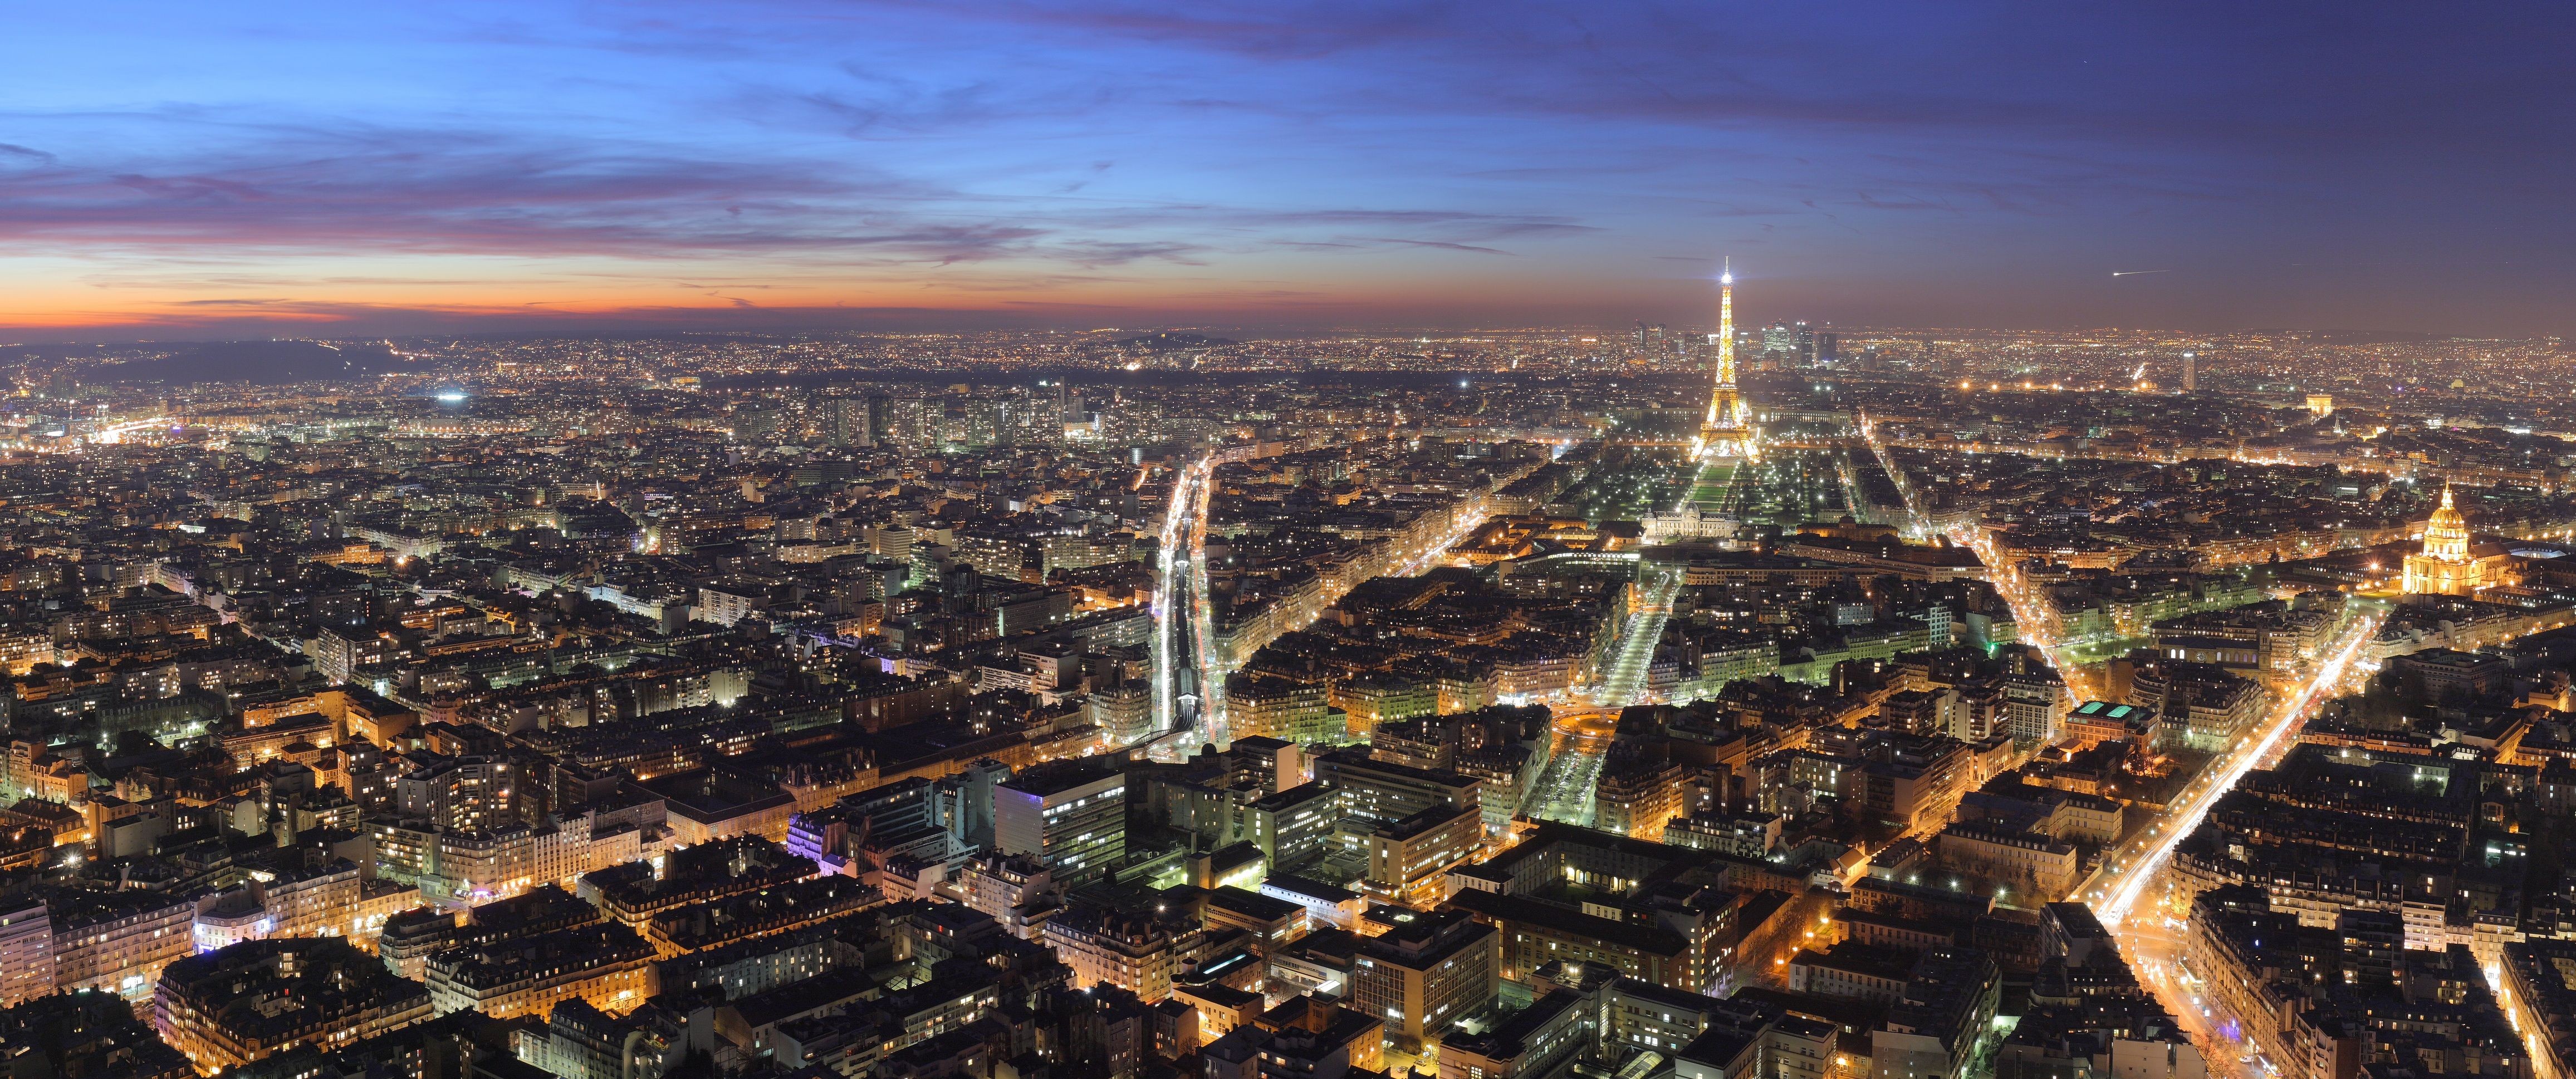 General 4626x1938 ultrawide dusk Paris cityscape France city lights aerial view Eiffel Tower panorama